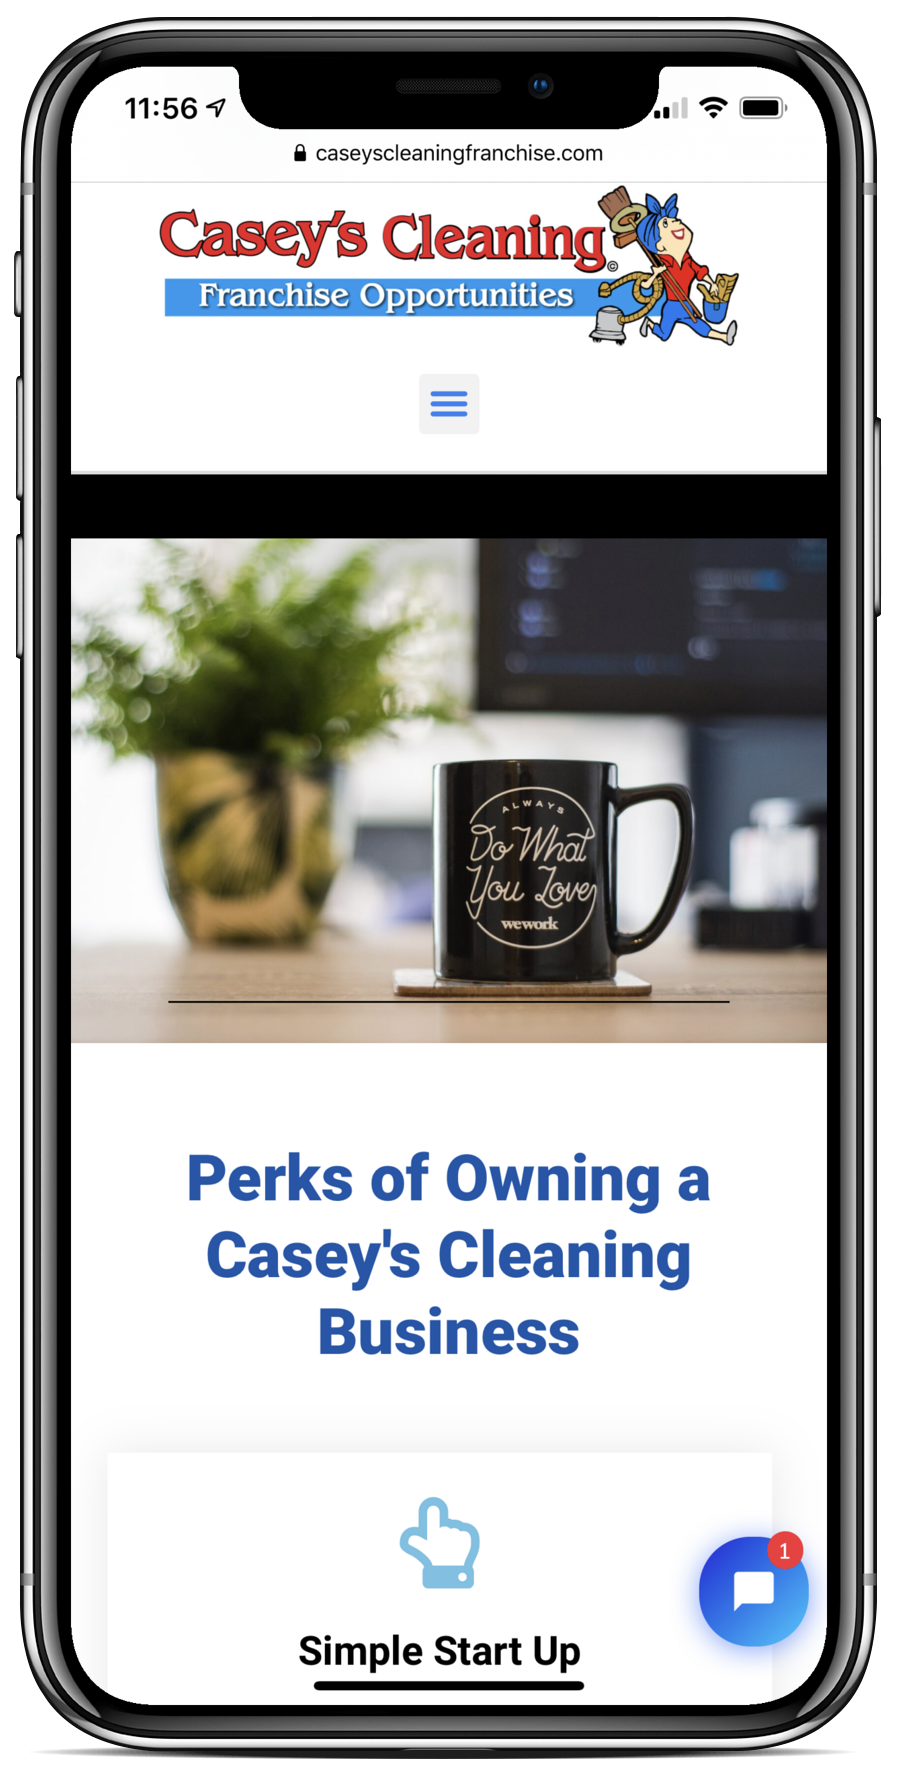 Casey's cleaning franchise join the family